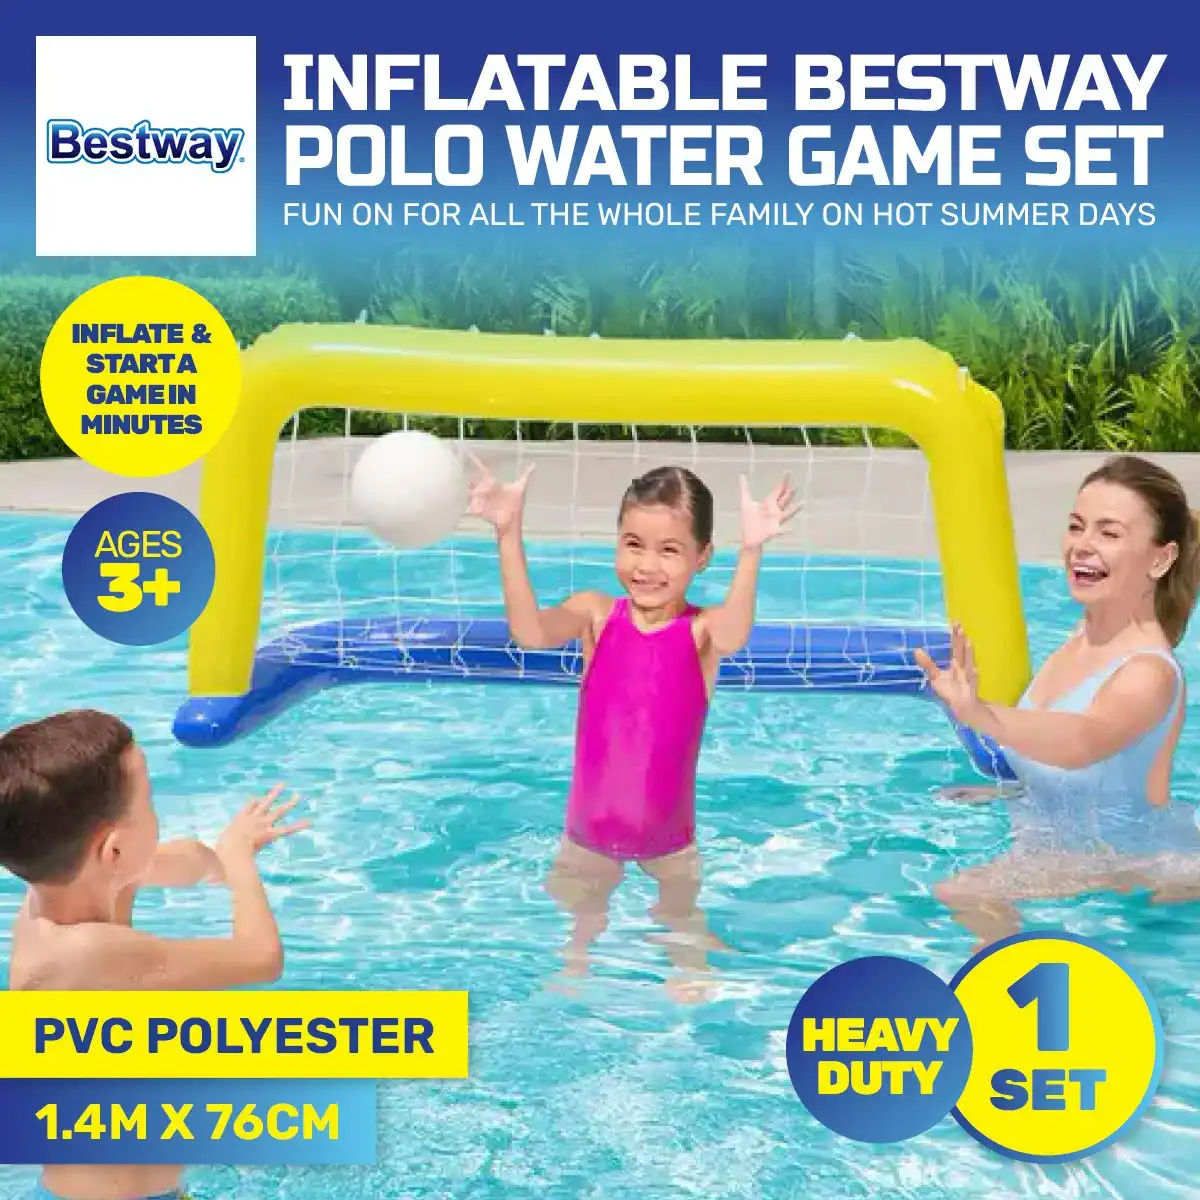 Bestway 1.4m x 76cm Inflatable Water Polo Pool Game Set & Ball UV Resistant